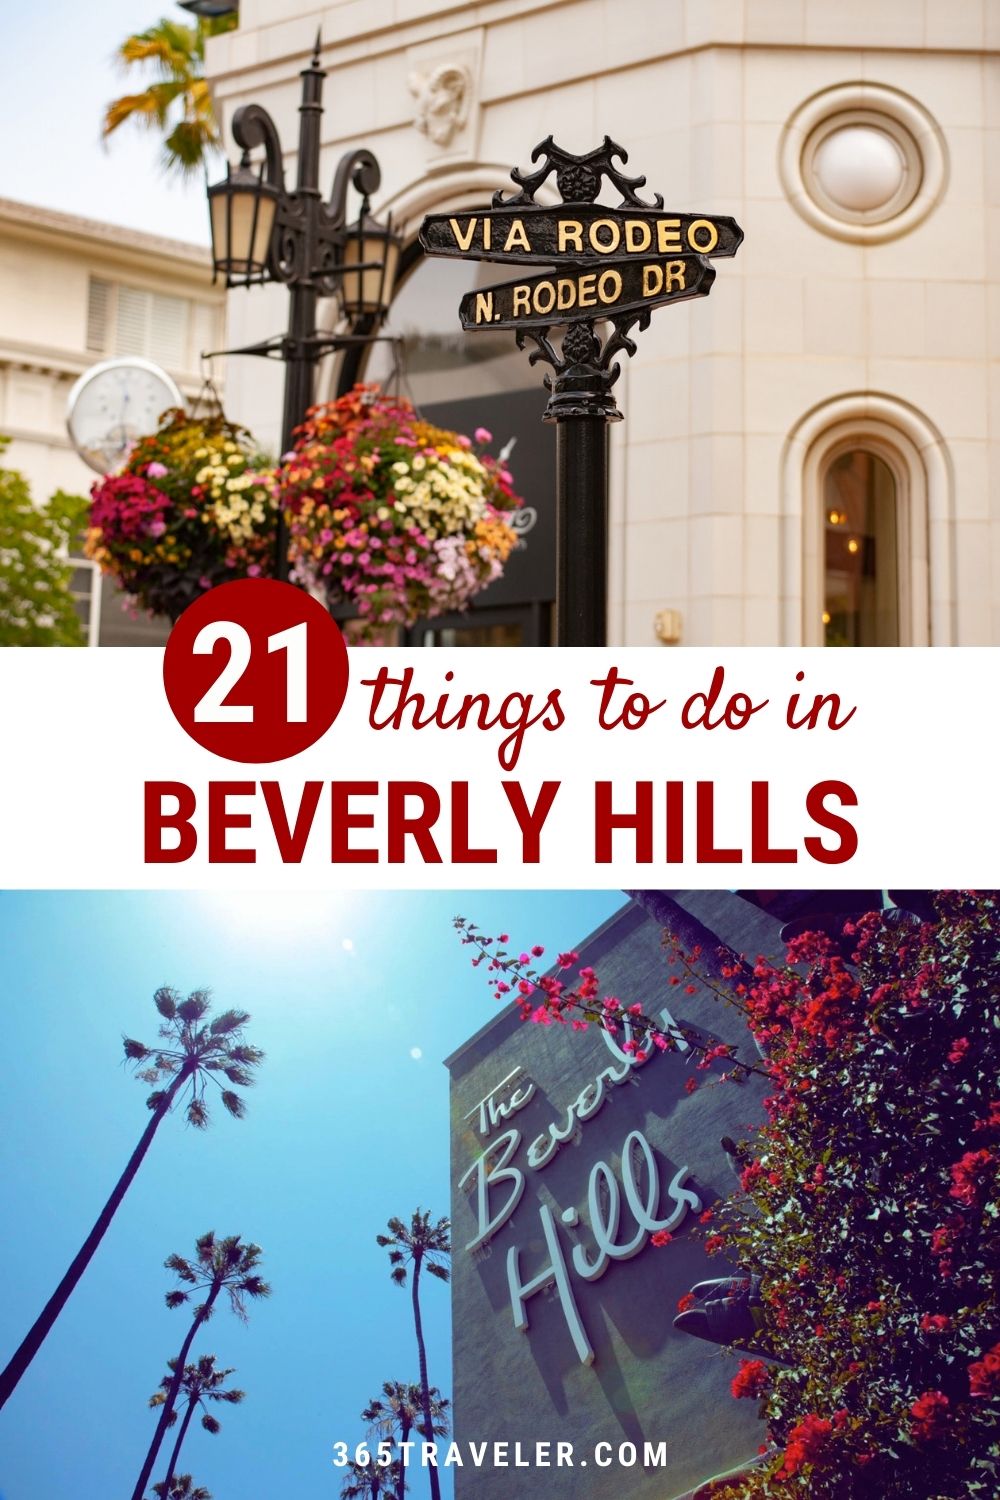 21 REALLY AMAZING THINGS TO DO IN BEVERLY HILLS